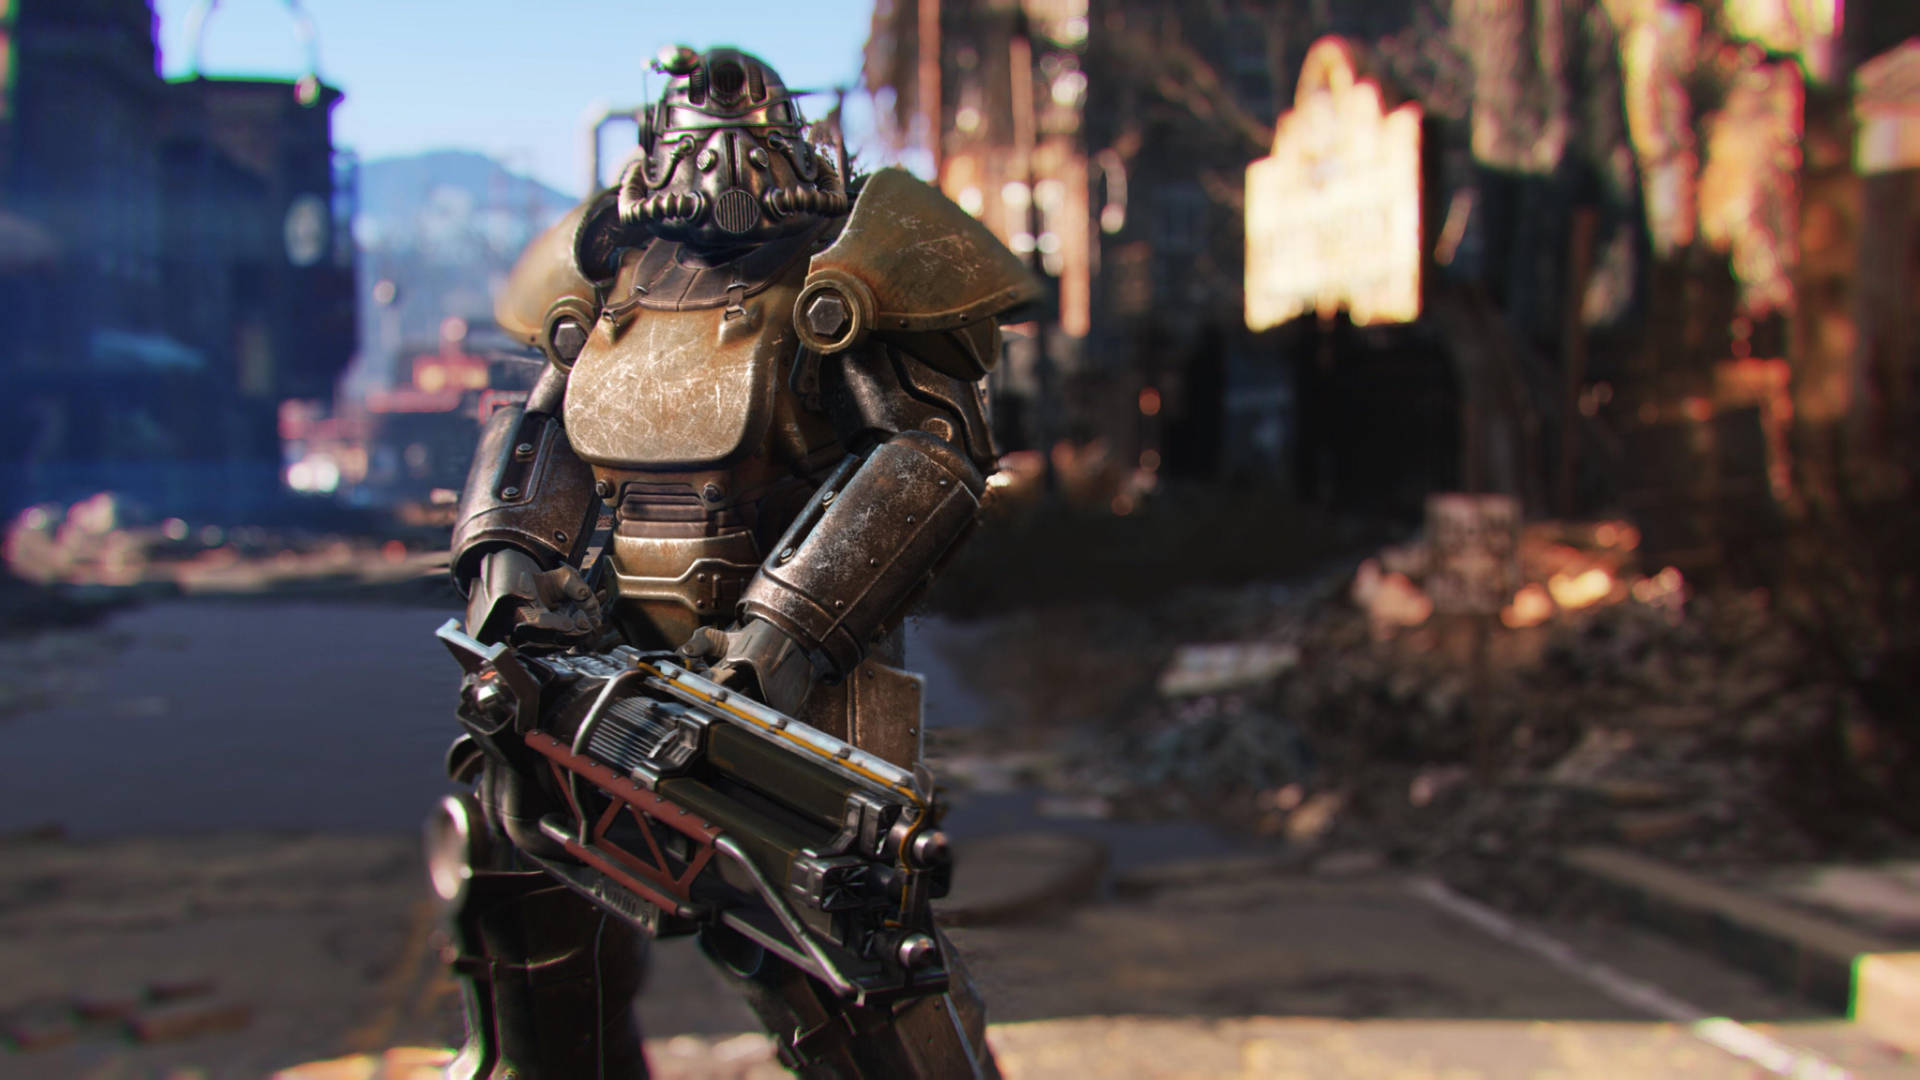 Brotherhood of Steel braves a Wrecked City in Fallout 4 Wallpaper